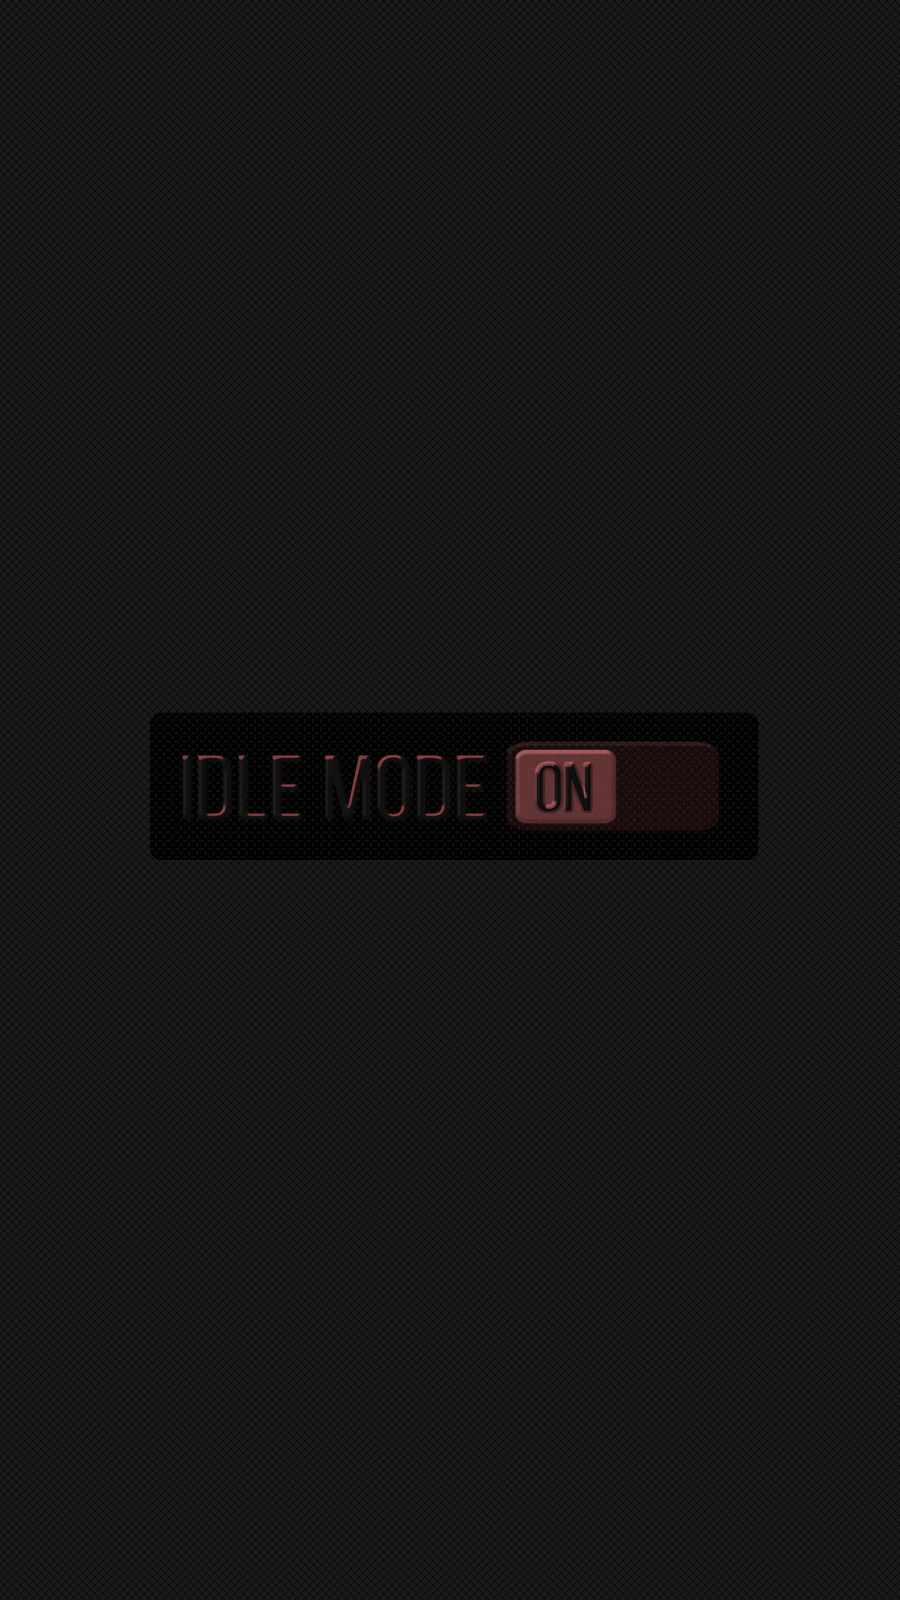 Idle mode ON iPhone Wallpaper HD